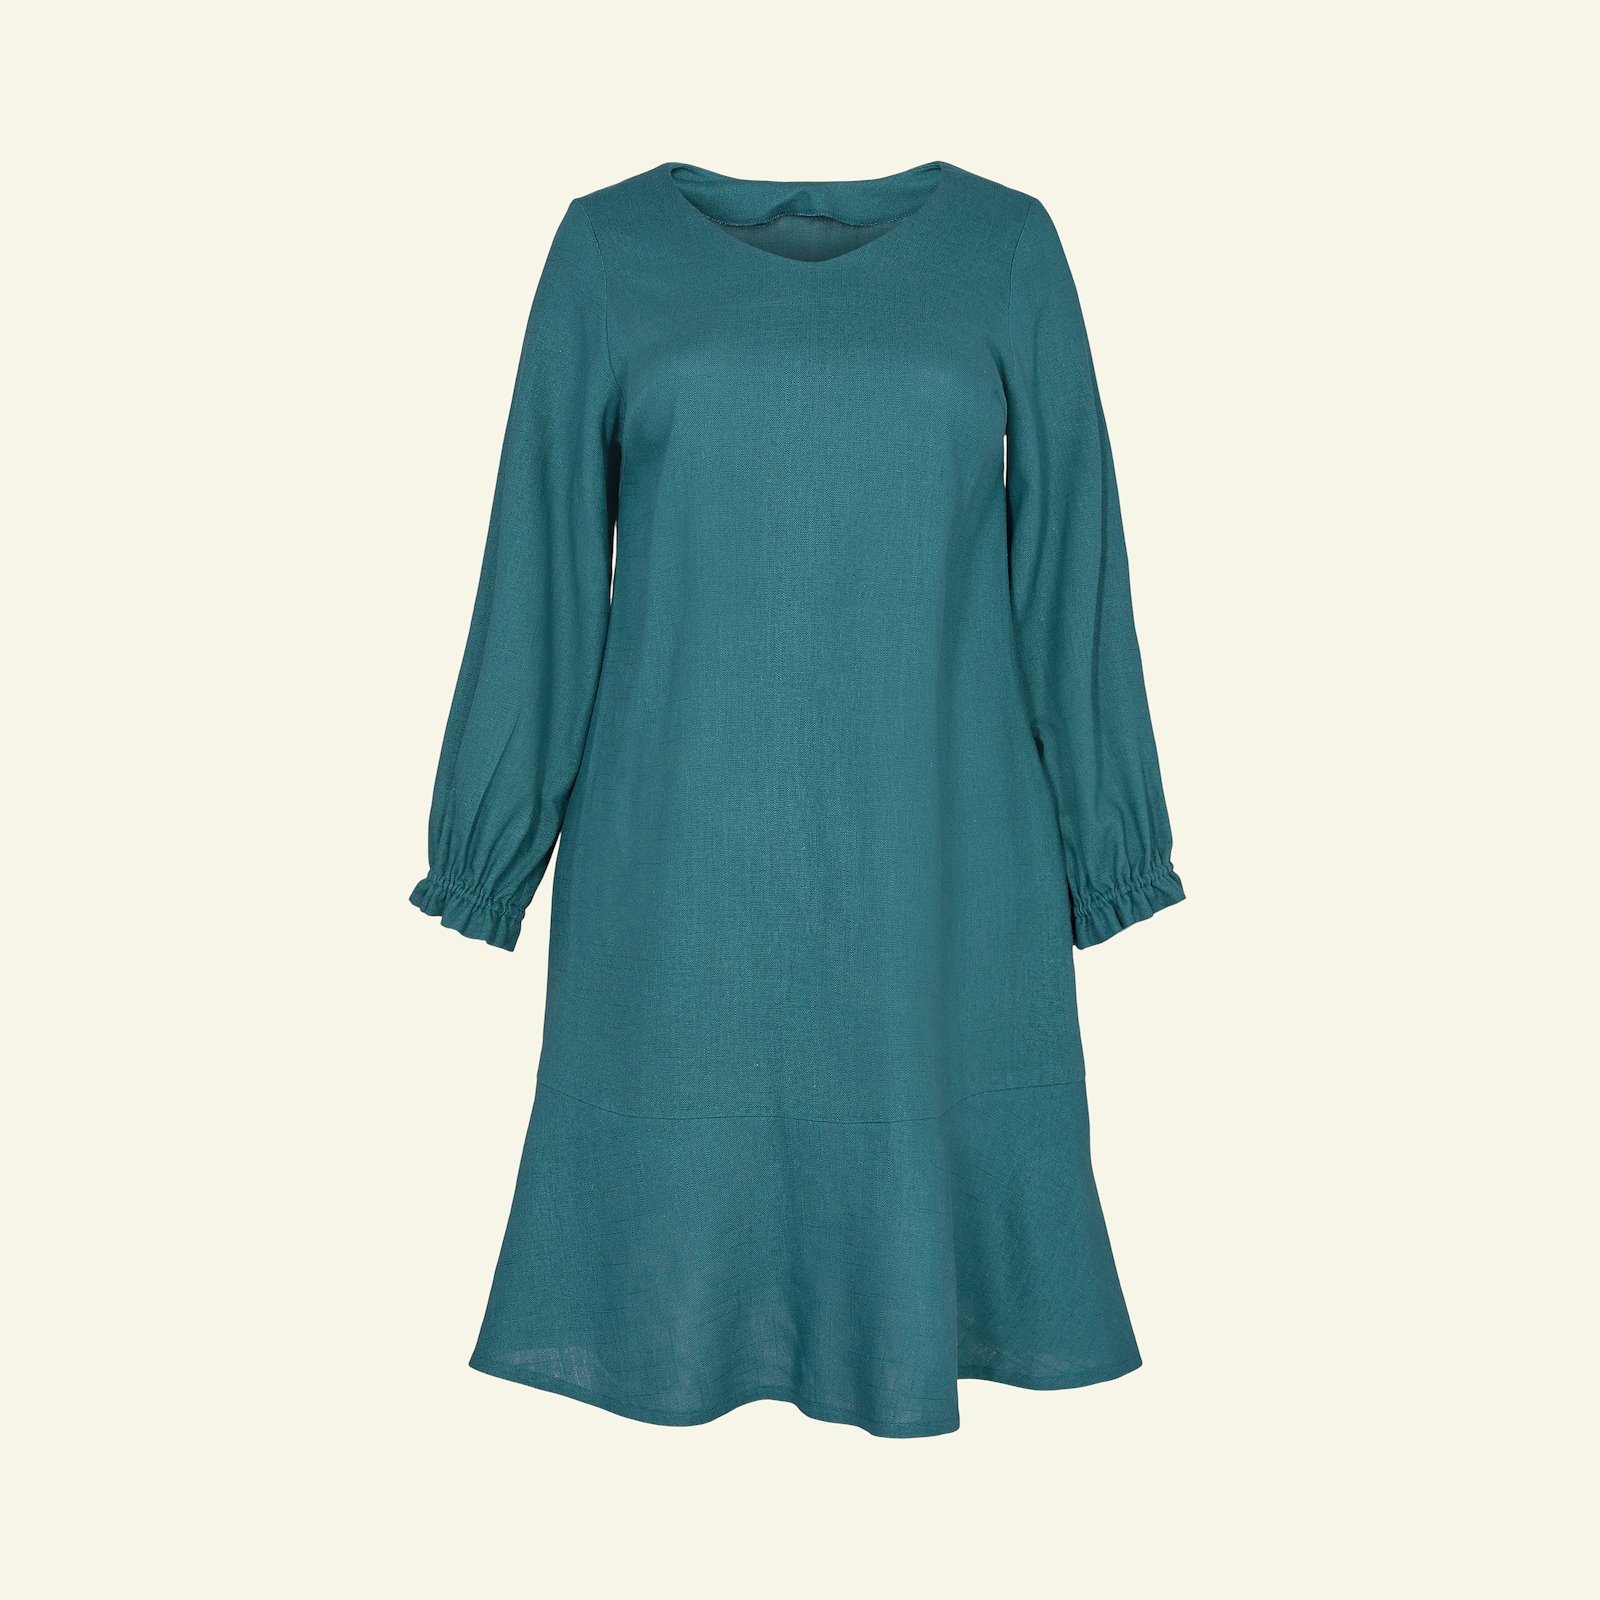 Dress with long and short sleeves, 46/18 p73018_410129_sskit